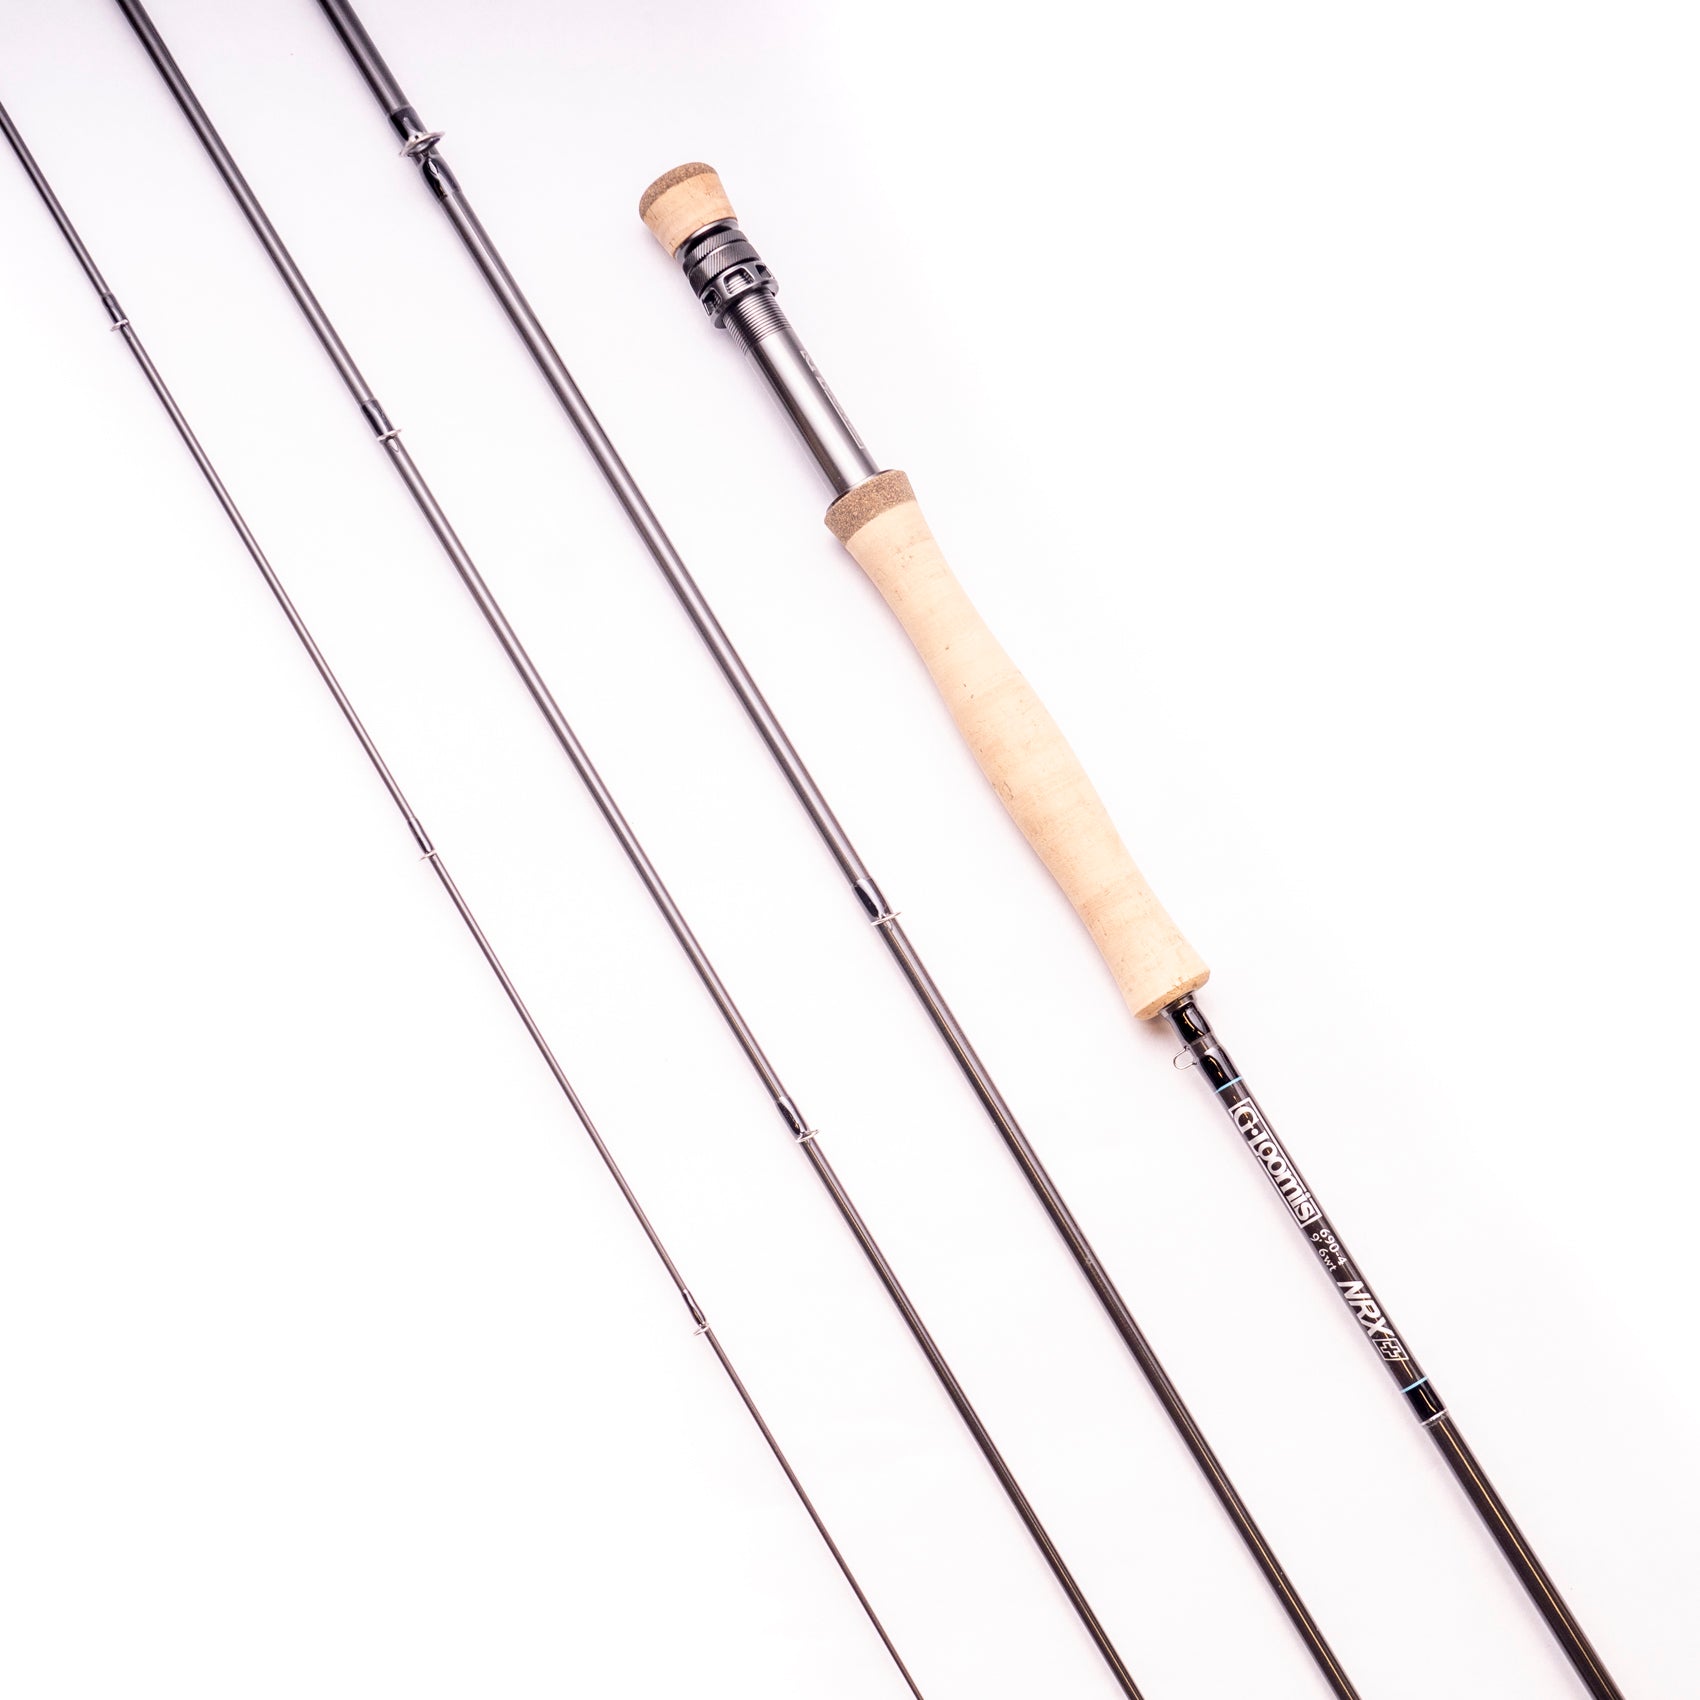 G. Loomis NRX + Fly Rod – Emerald Water Anglers